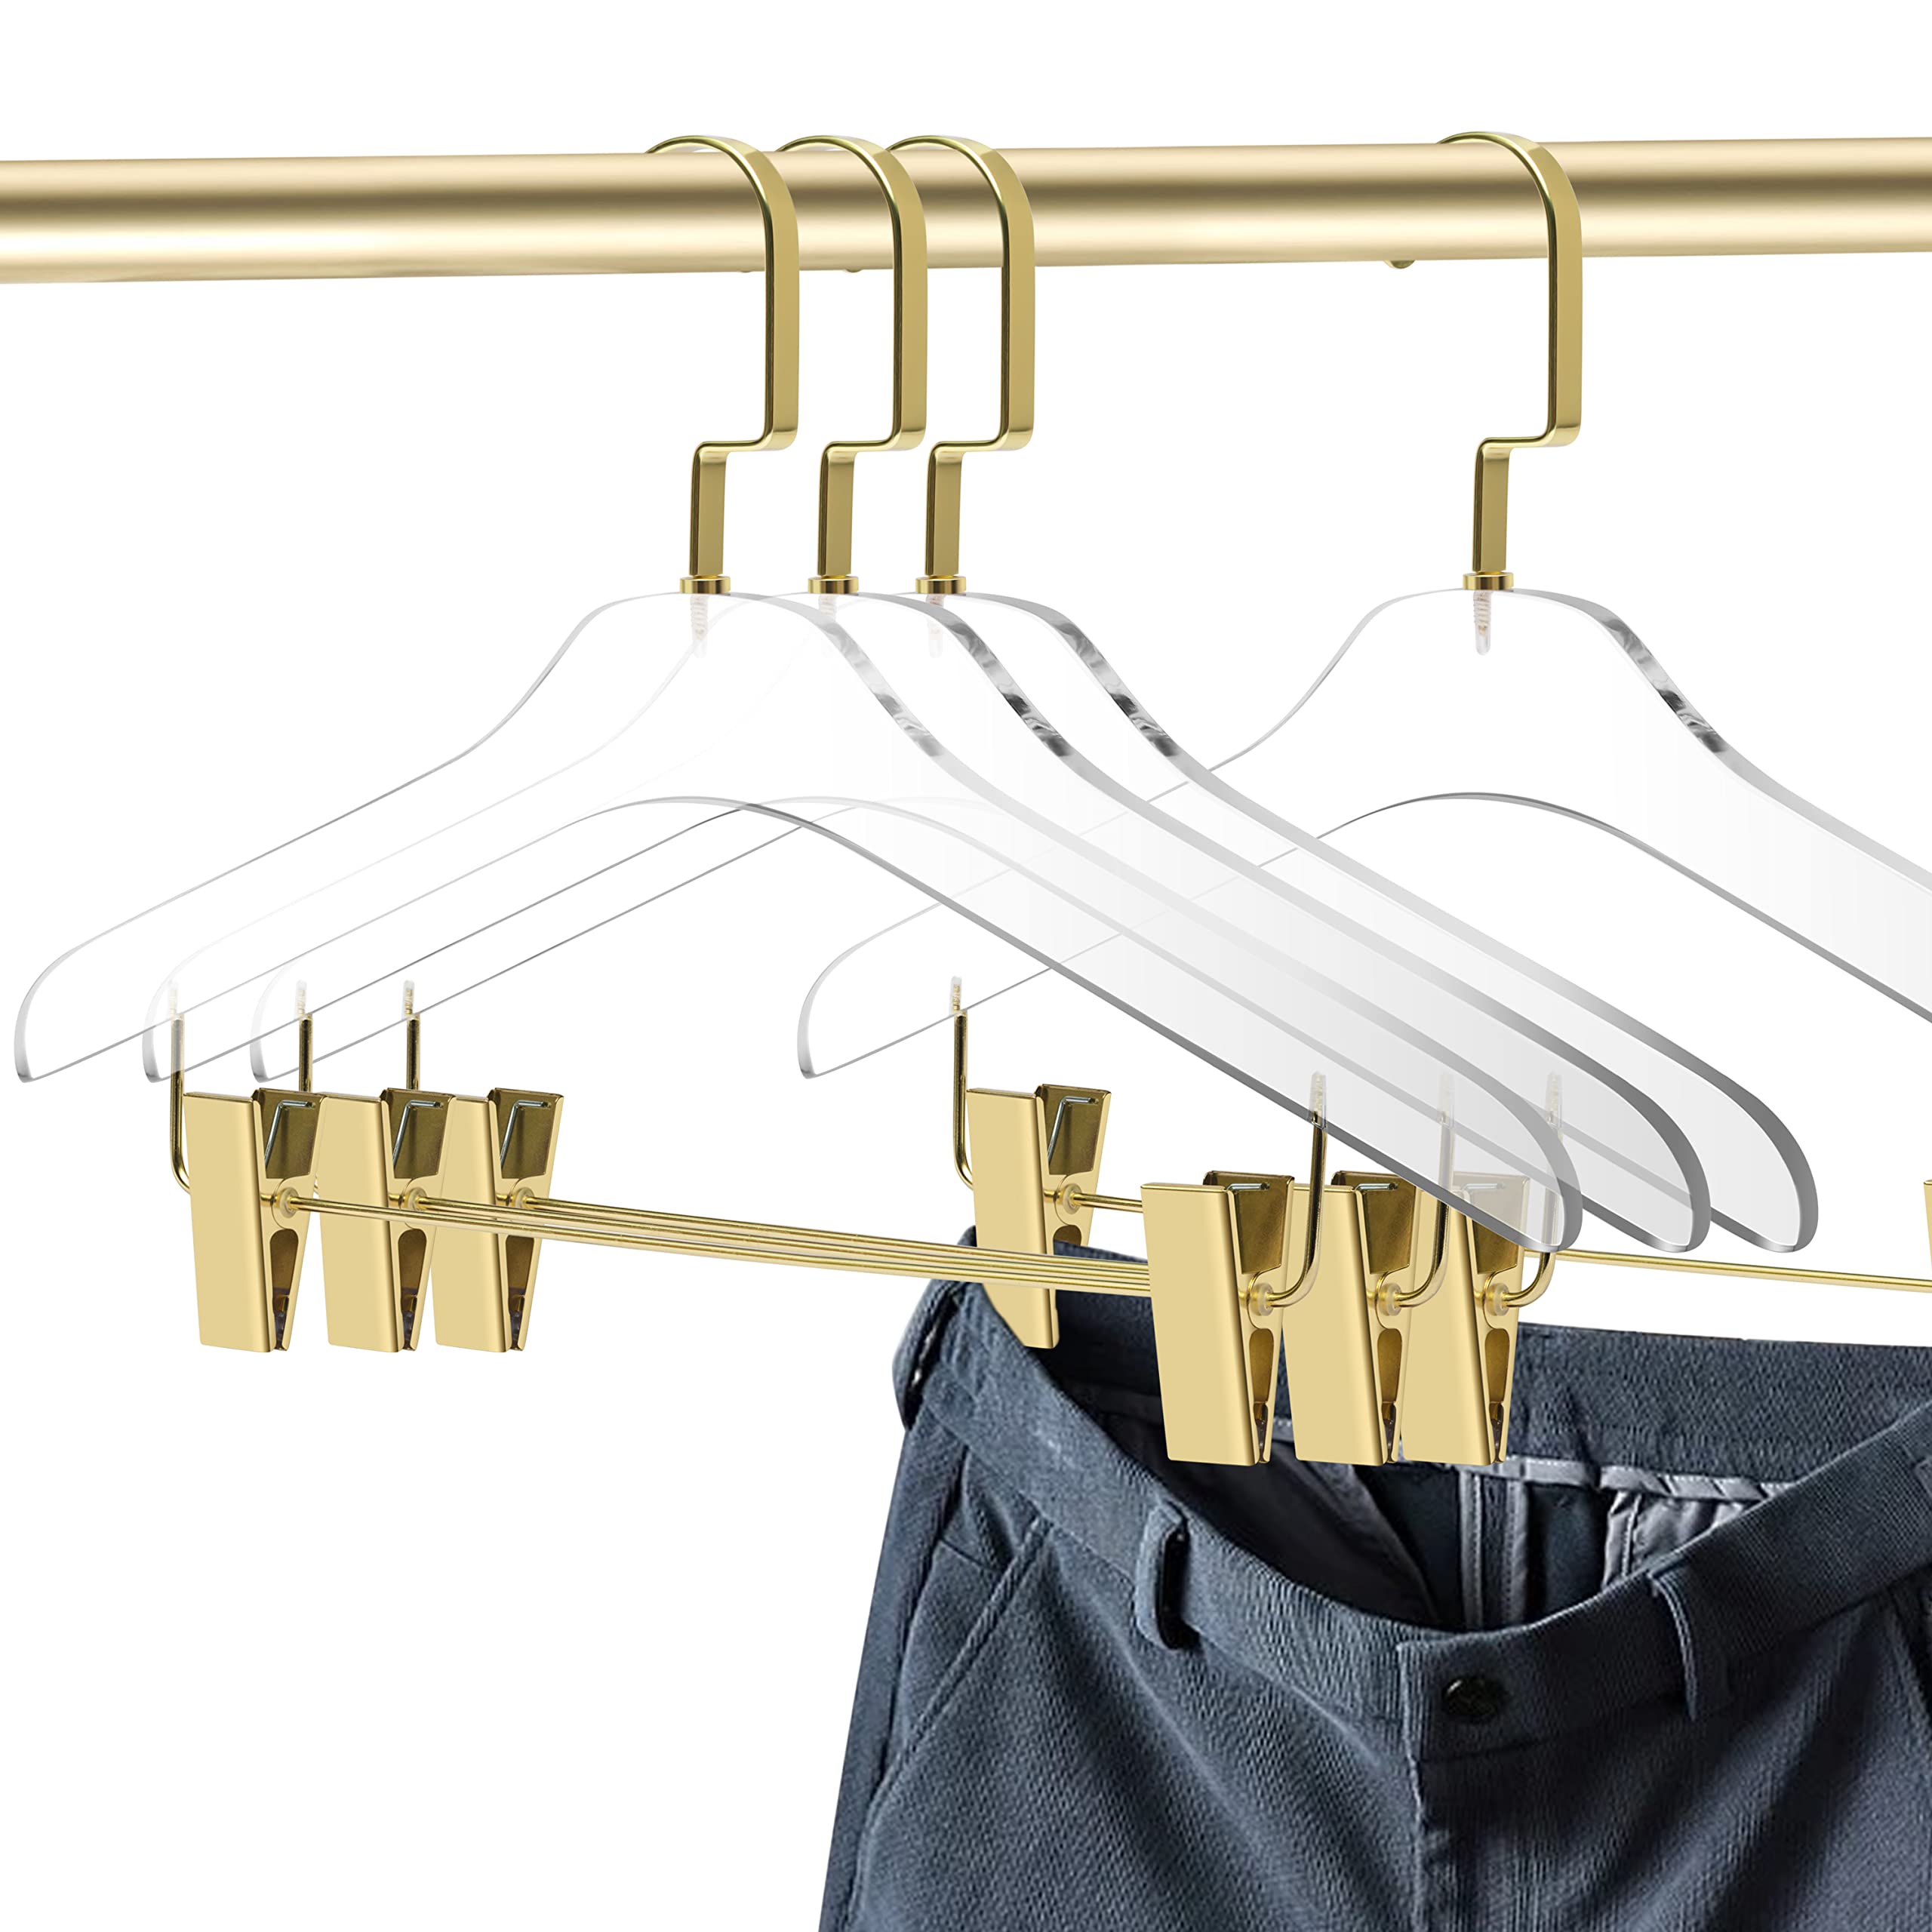 Quality Clear Acrylic Skirt Pant Hangers with Clips � 4 Pack, Stylish Clothes Hanger with Gold Hooks - Coat Hanger for Dress, Suit - Closet Organizer Adult Hangers - Cloth Hangers (Gold Hook, 4)  - Like New